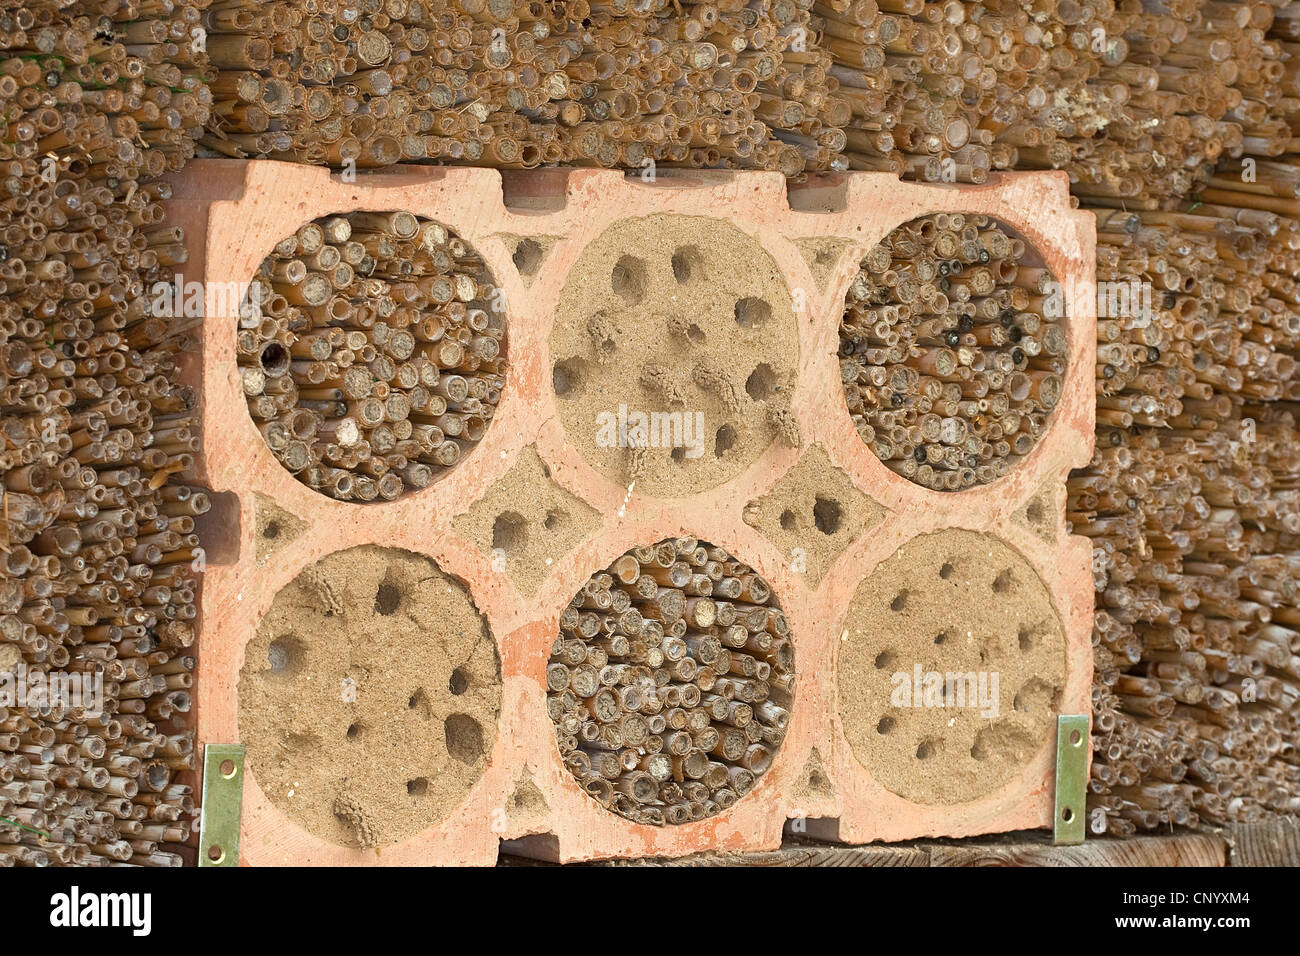 insect house, nesting aids for bees and wasps Stock Photo